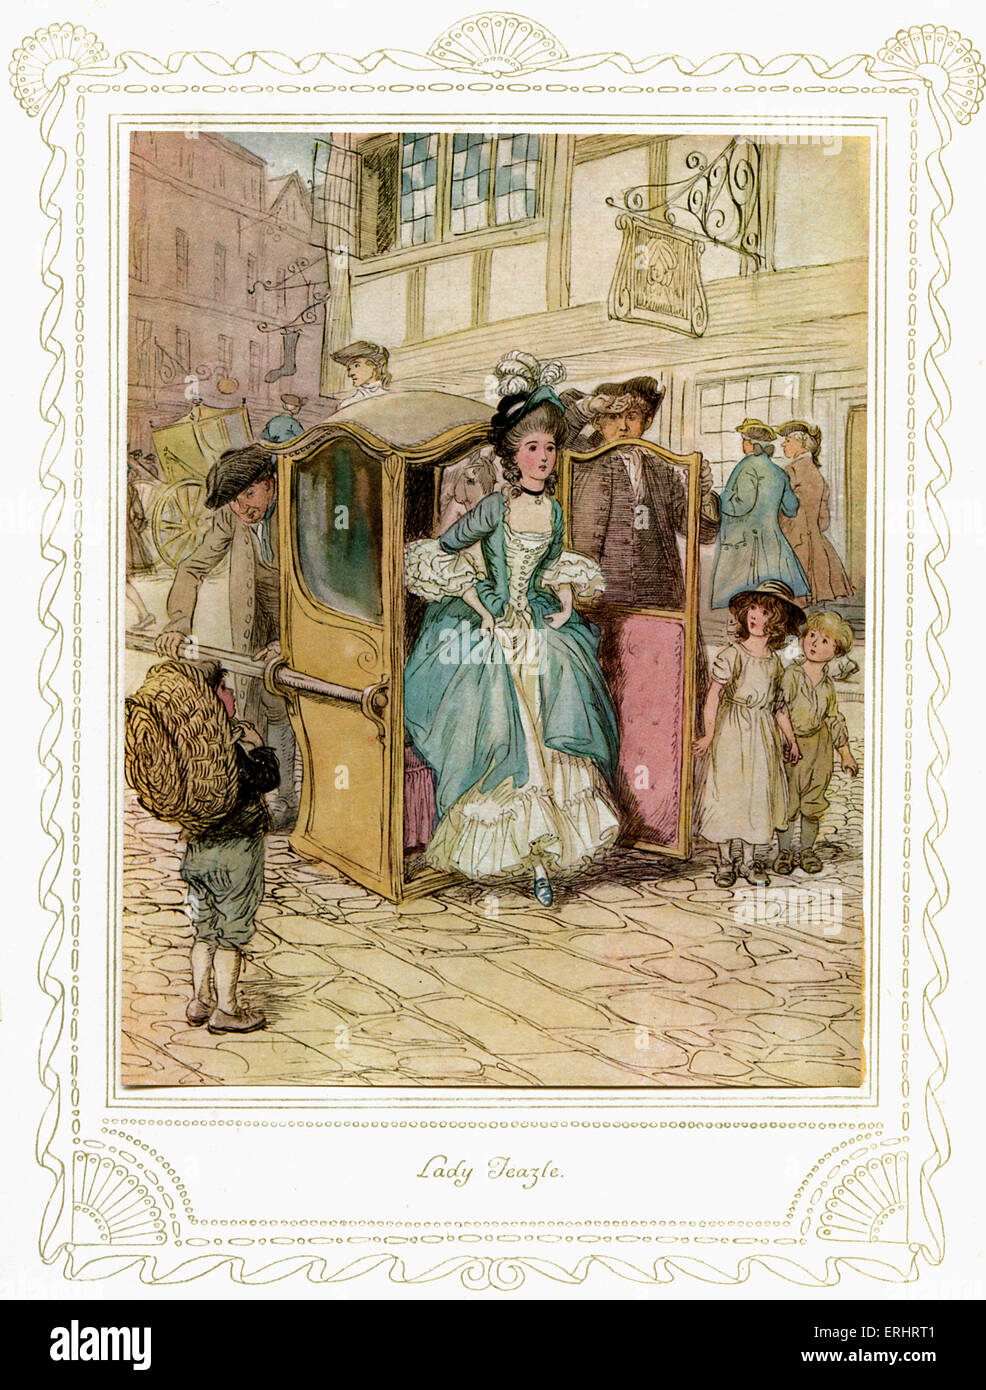 Richard Brinsley Sheridan's play - 'The School for Scandal'.  'Lady Teazle'.  First performed 1777. Illustrated by Hugh Stock Photo